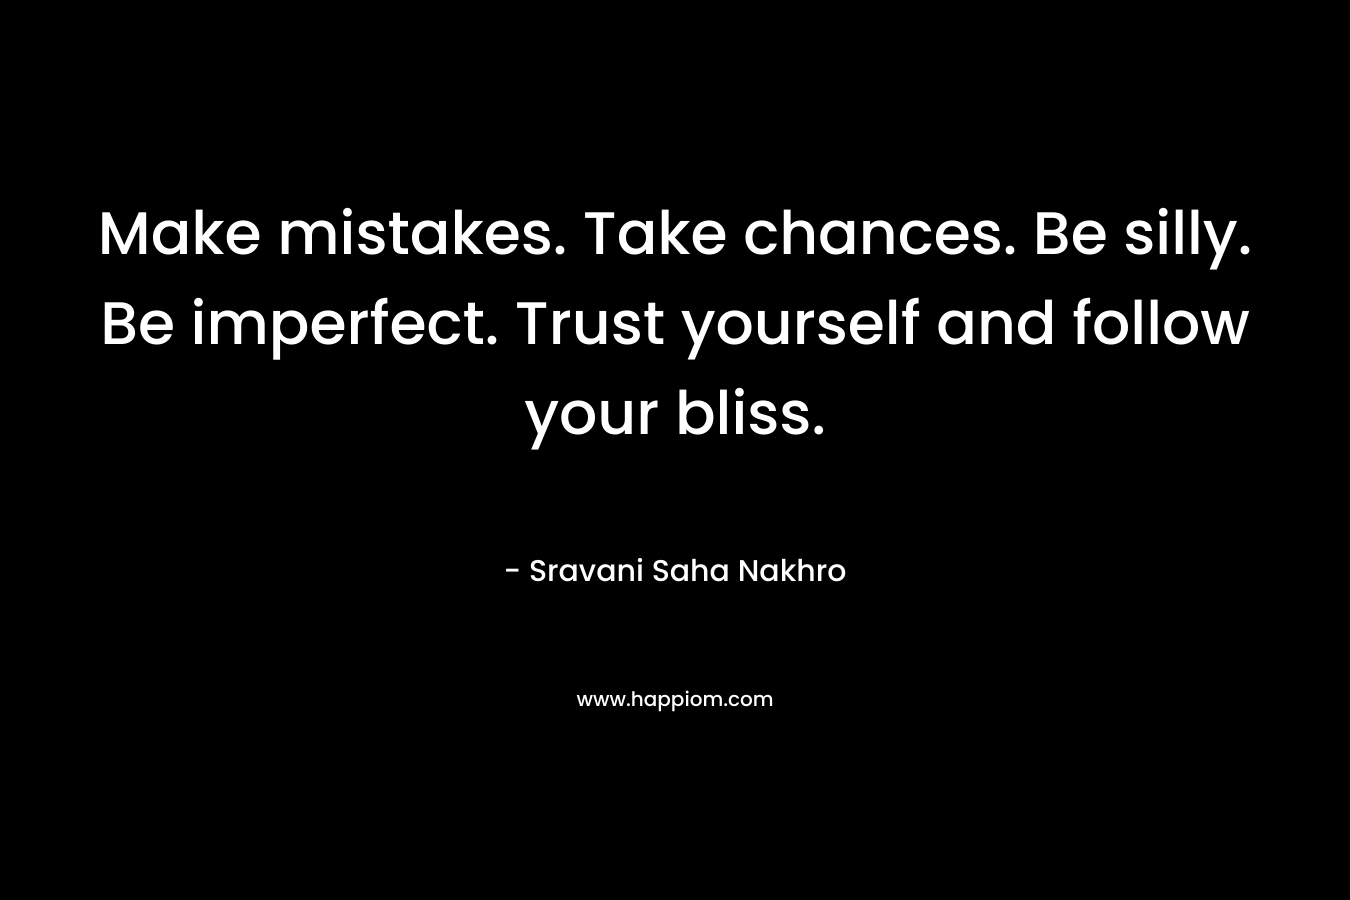 Make mistakes. Take chances. Be silly. Be imperfect. Trust yourself and follow your bliss.